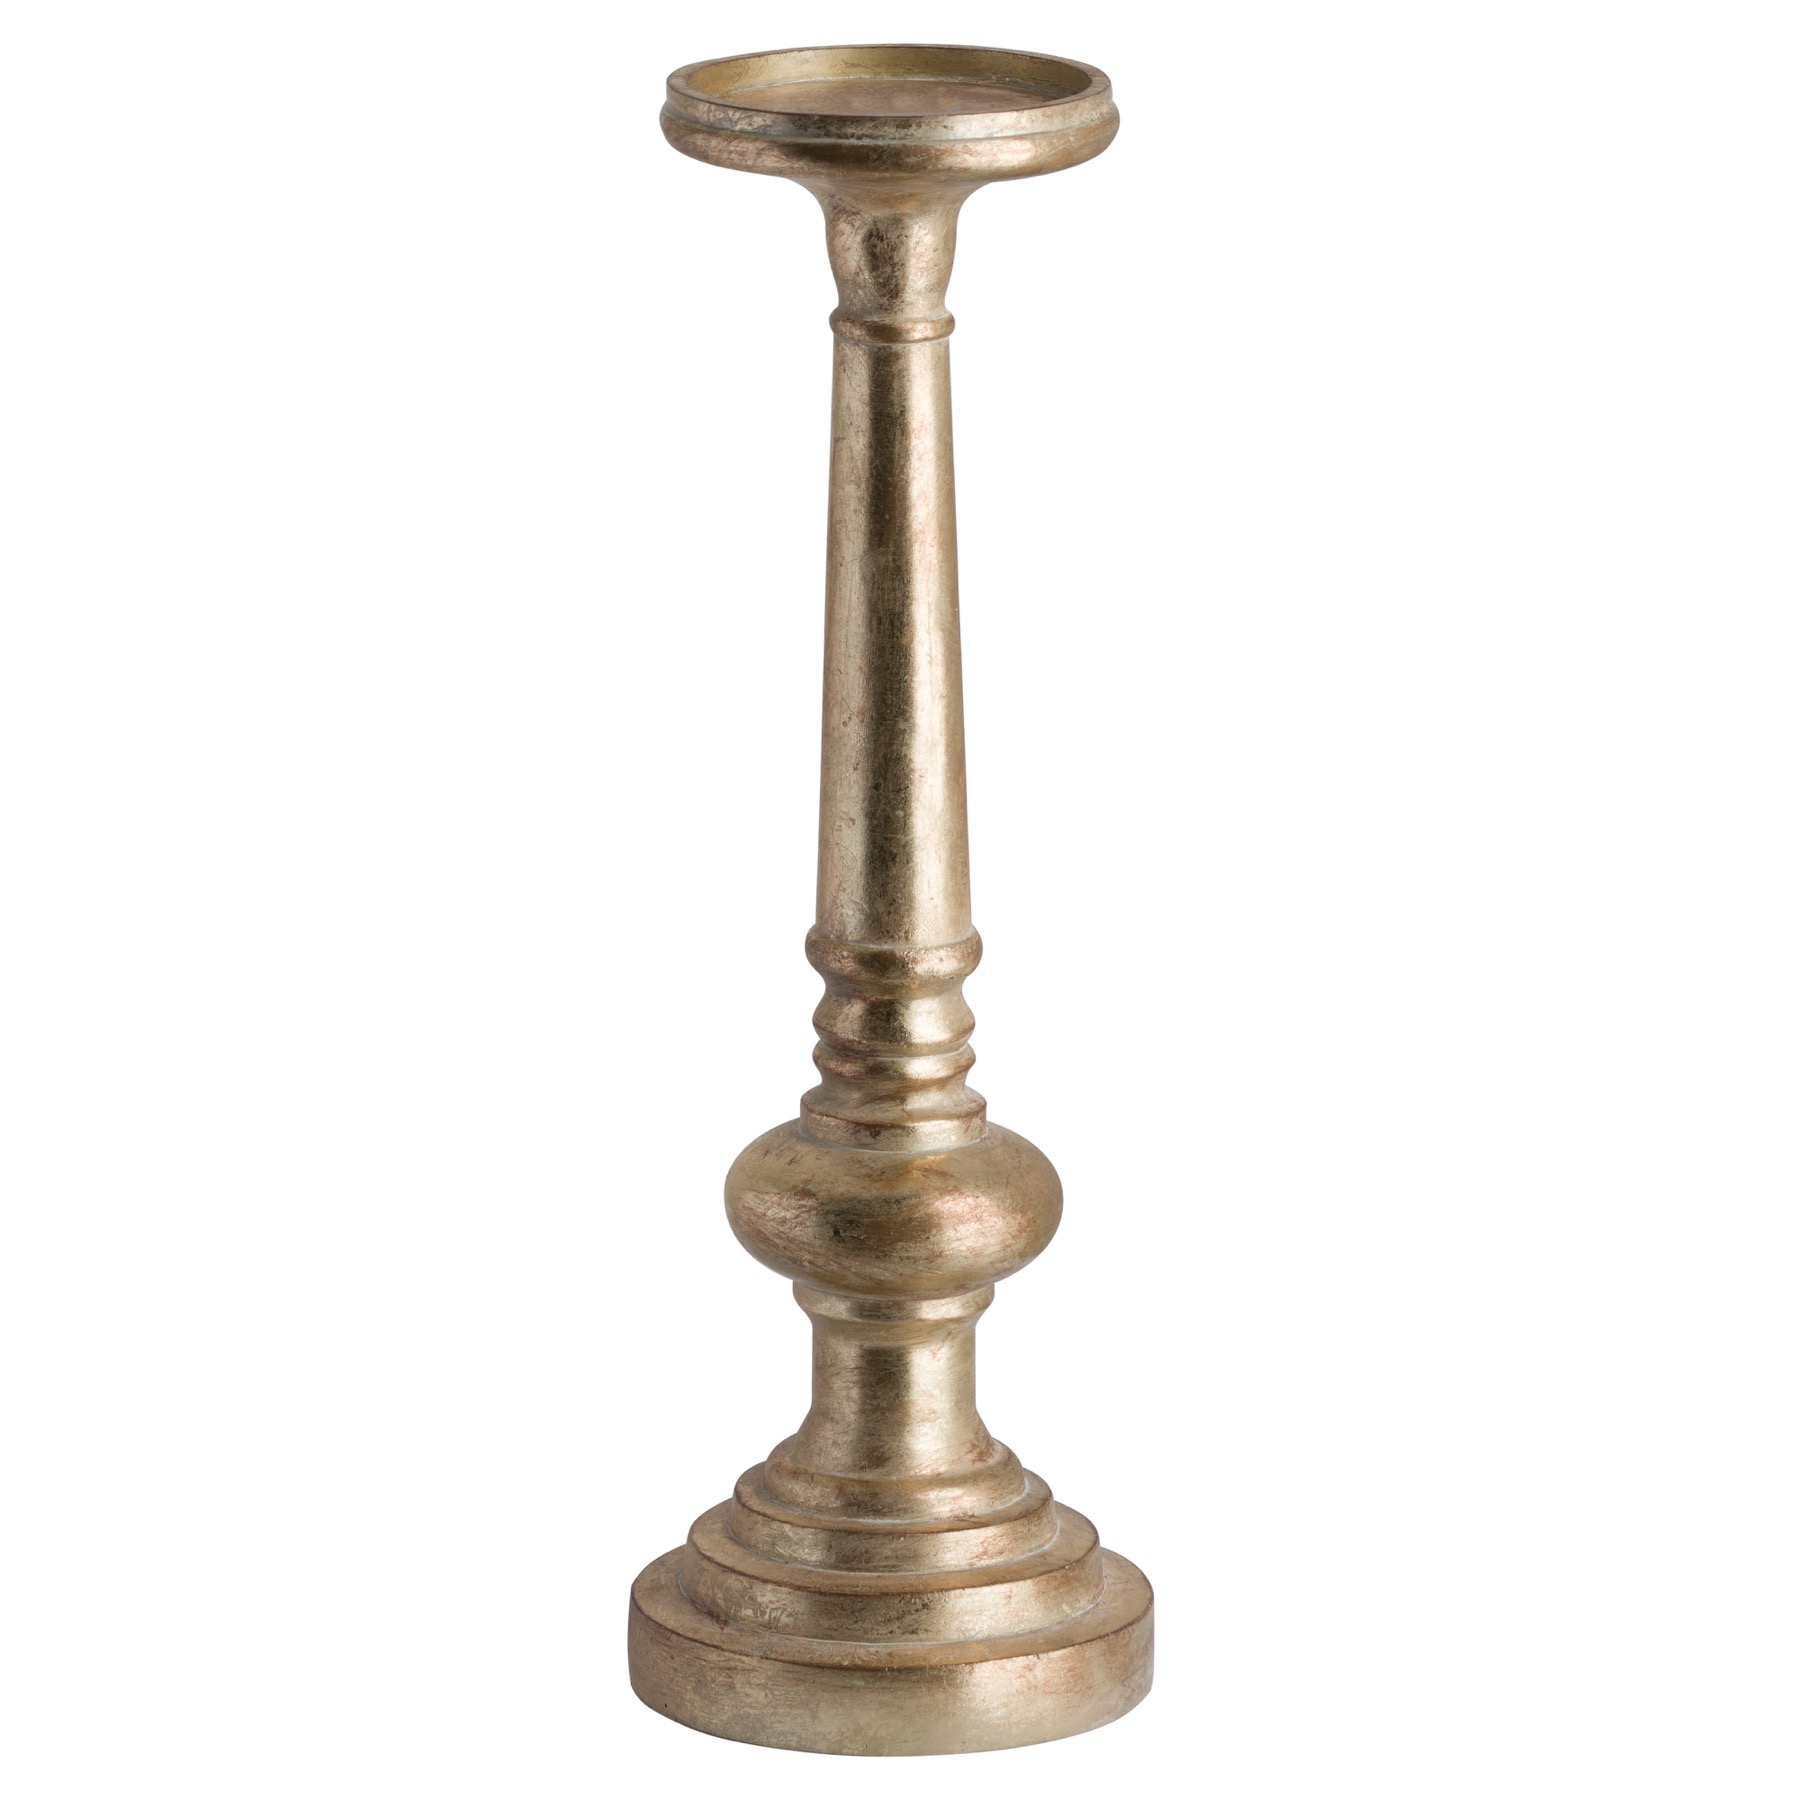 Antique Brass Effect Tall Candle Holder - Image 1